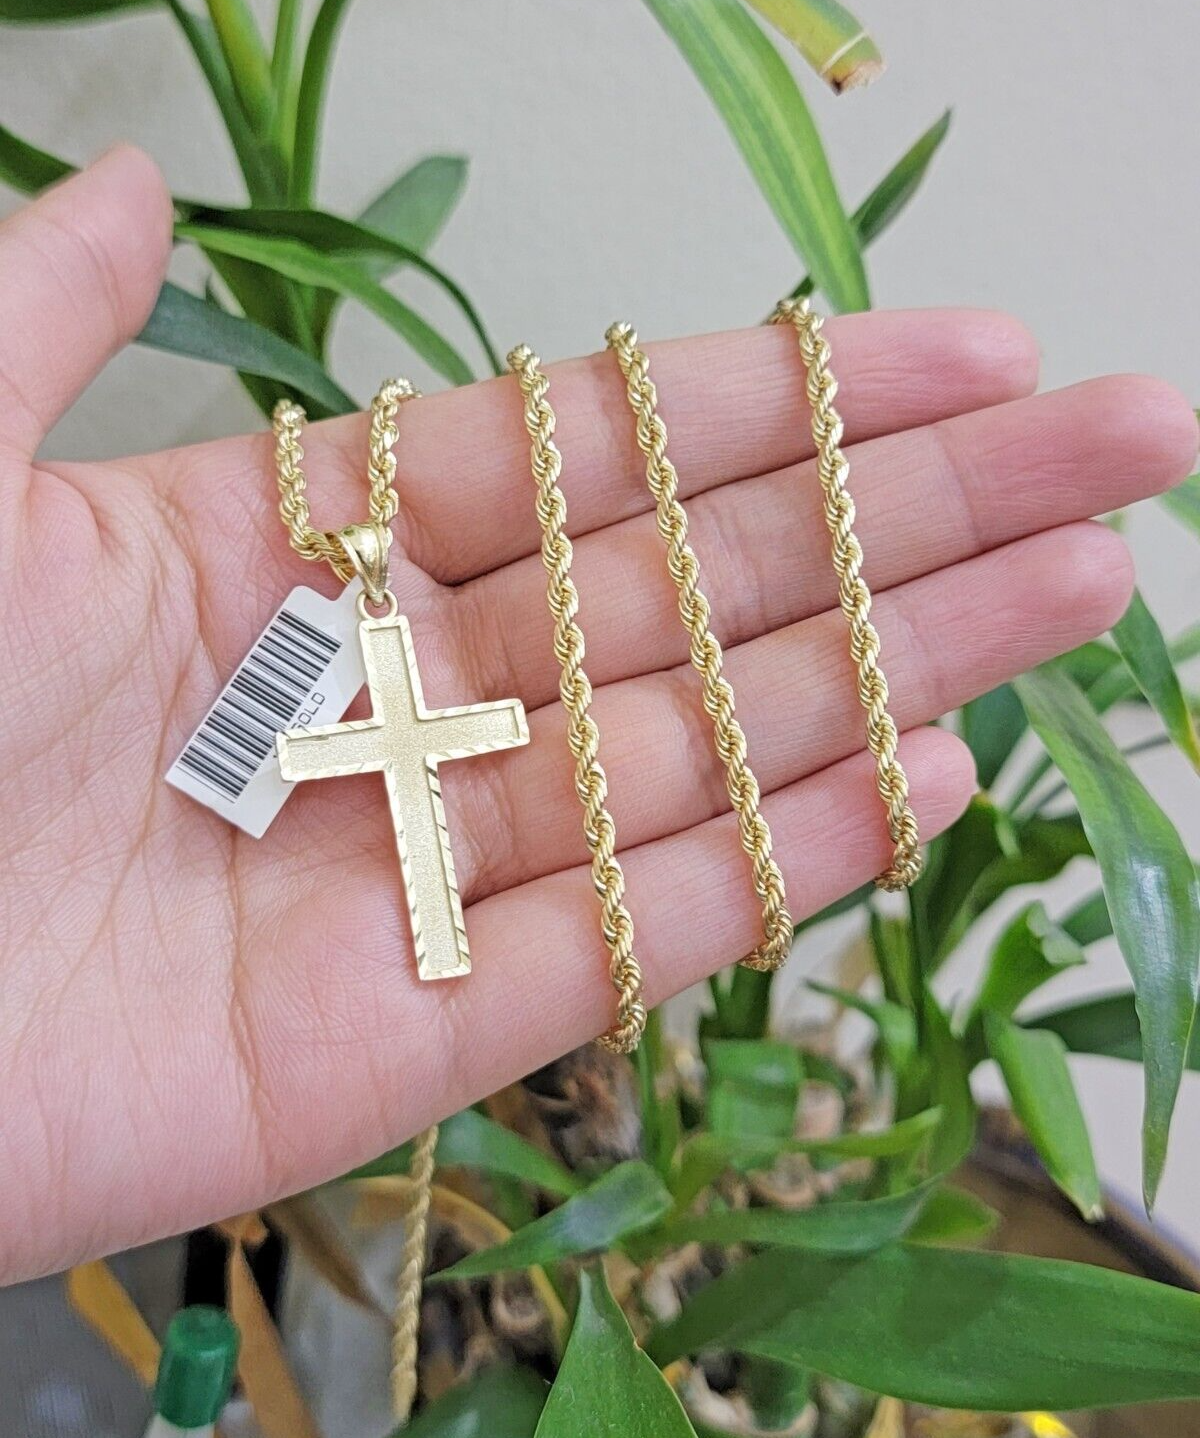 10k Yellow Gold Rope Chain & Cross Charm Set REAL 10KT 20 Inch necklace pendant